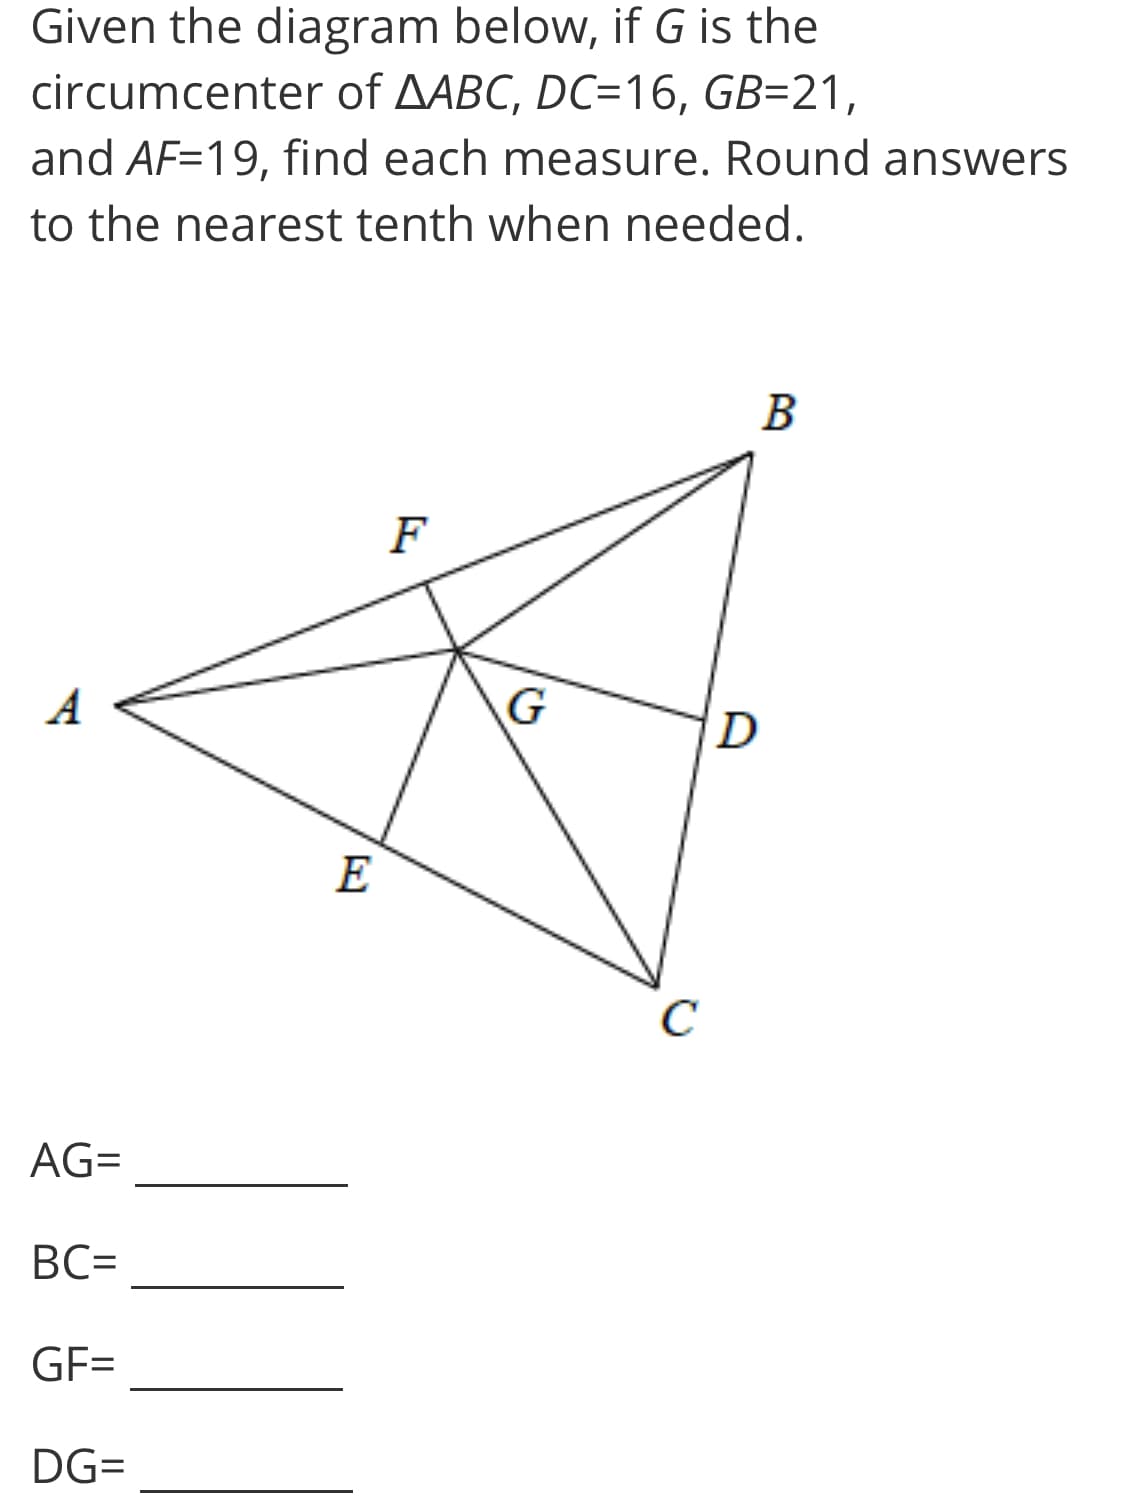 Given the diagram below, if G is the
circumcenter of AABC, DC=16, GB=21,
and AF=19, find each measure. Round answers
to the nearest tenth when needed.
F
A
G
D
E
C
AG=
BC=
GF=
DG=
